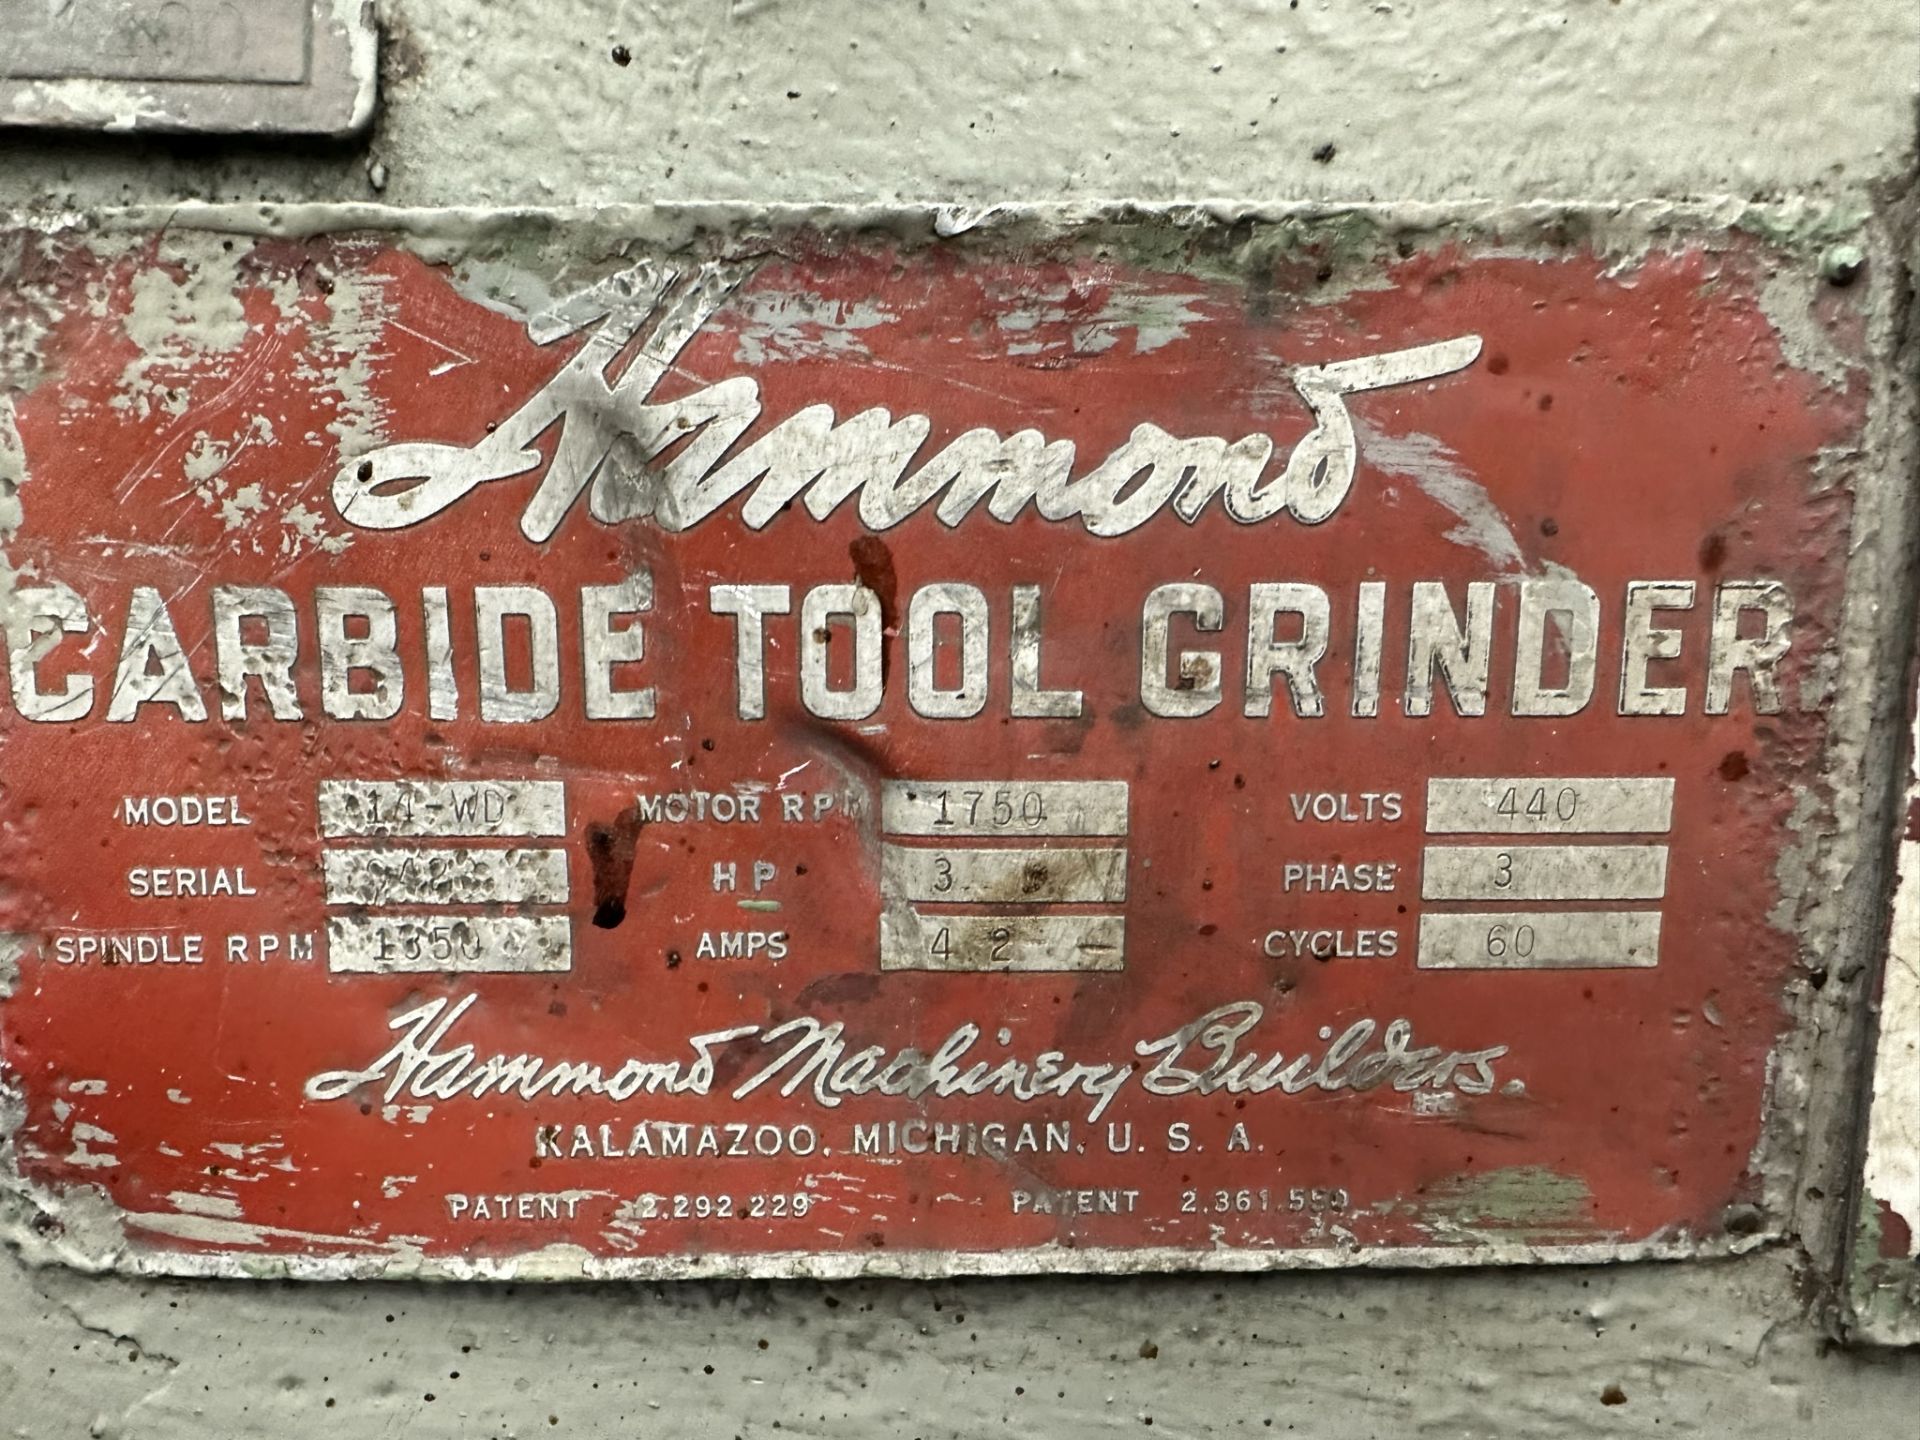 HAMMOND 14" DOUBLE SIDED CARBIDE TOOL GRINDER, MODEL 42-WDSC, 440V/3-PHASE, S/N 9423 - Image 4 of 4